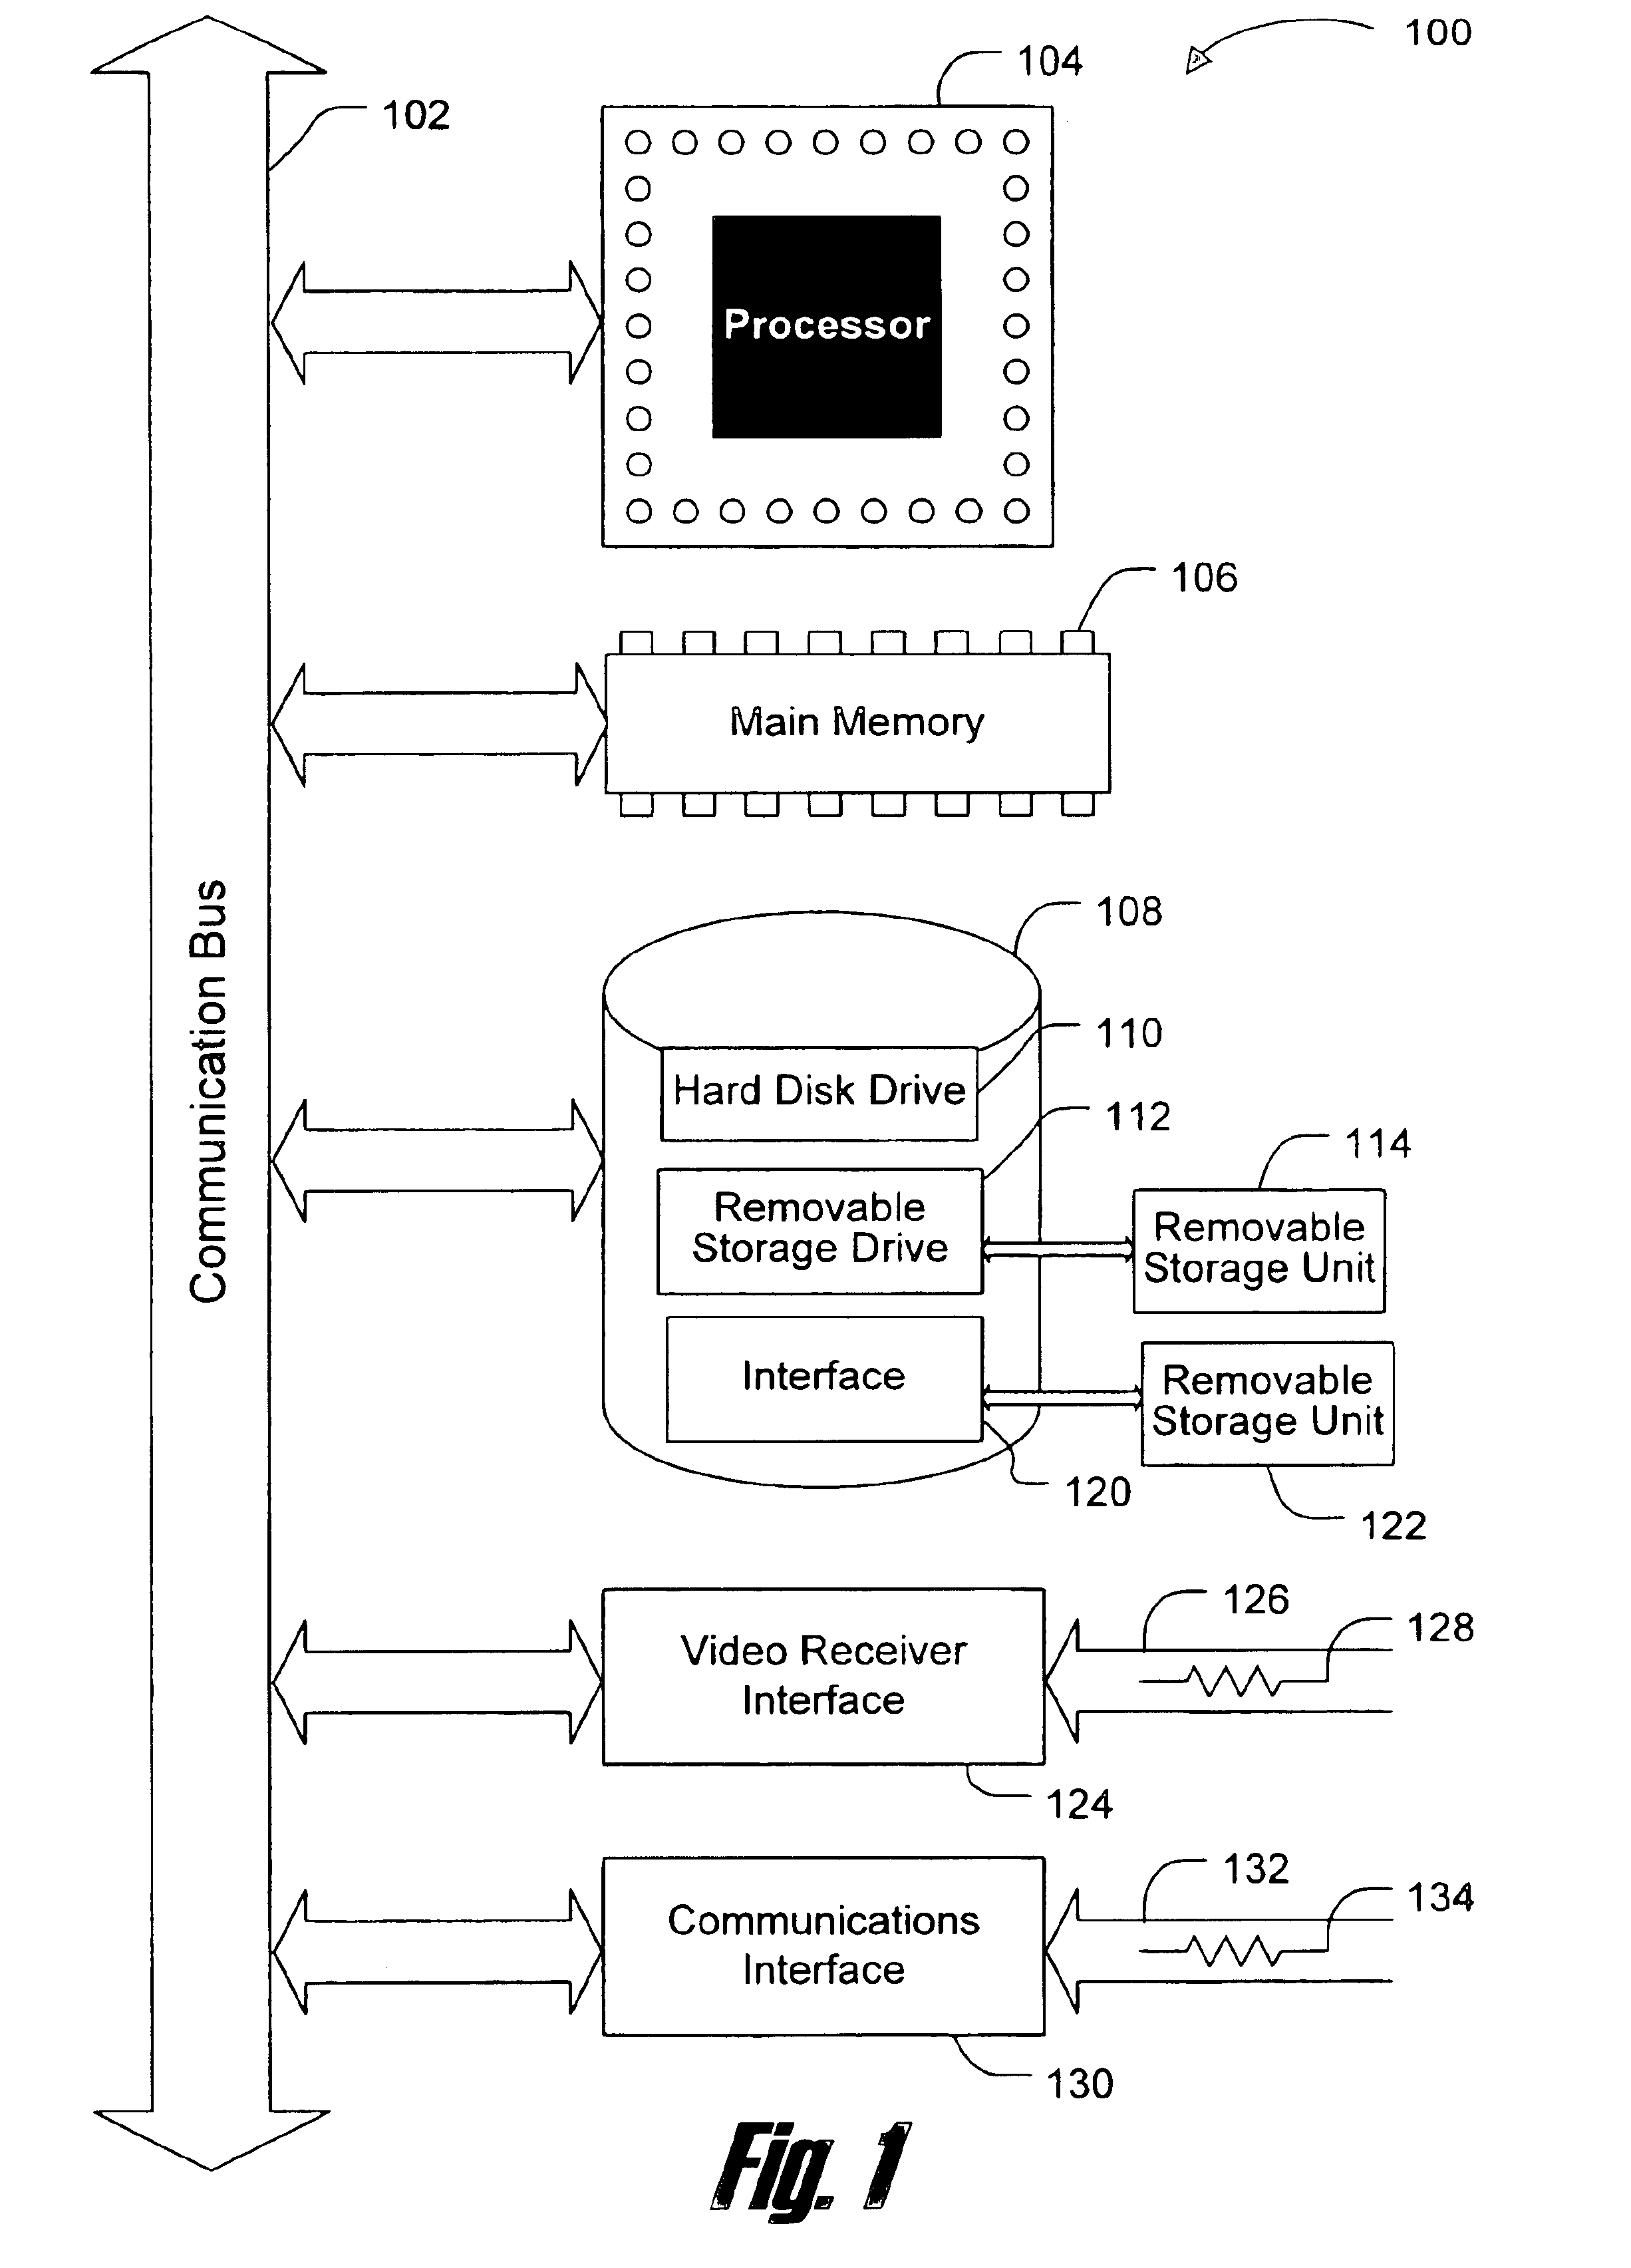 System and method for detecting modifications of video signals designed to prevent copying by traditional video tape recorders